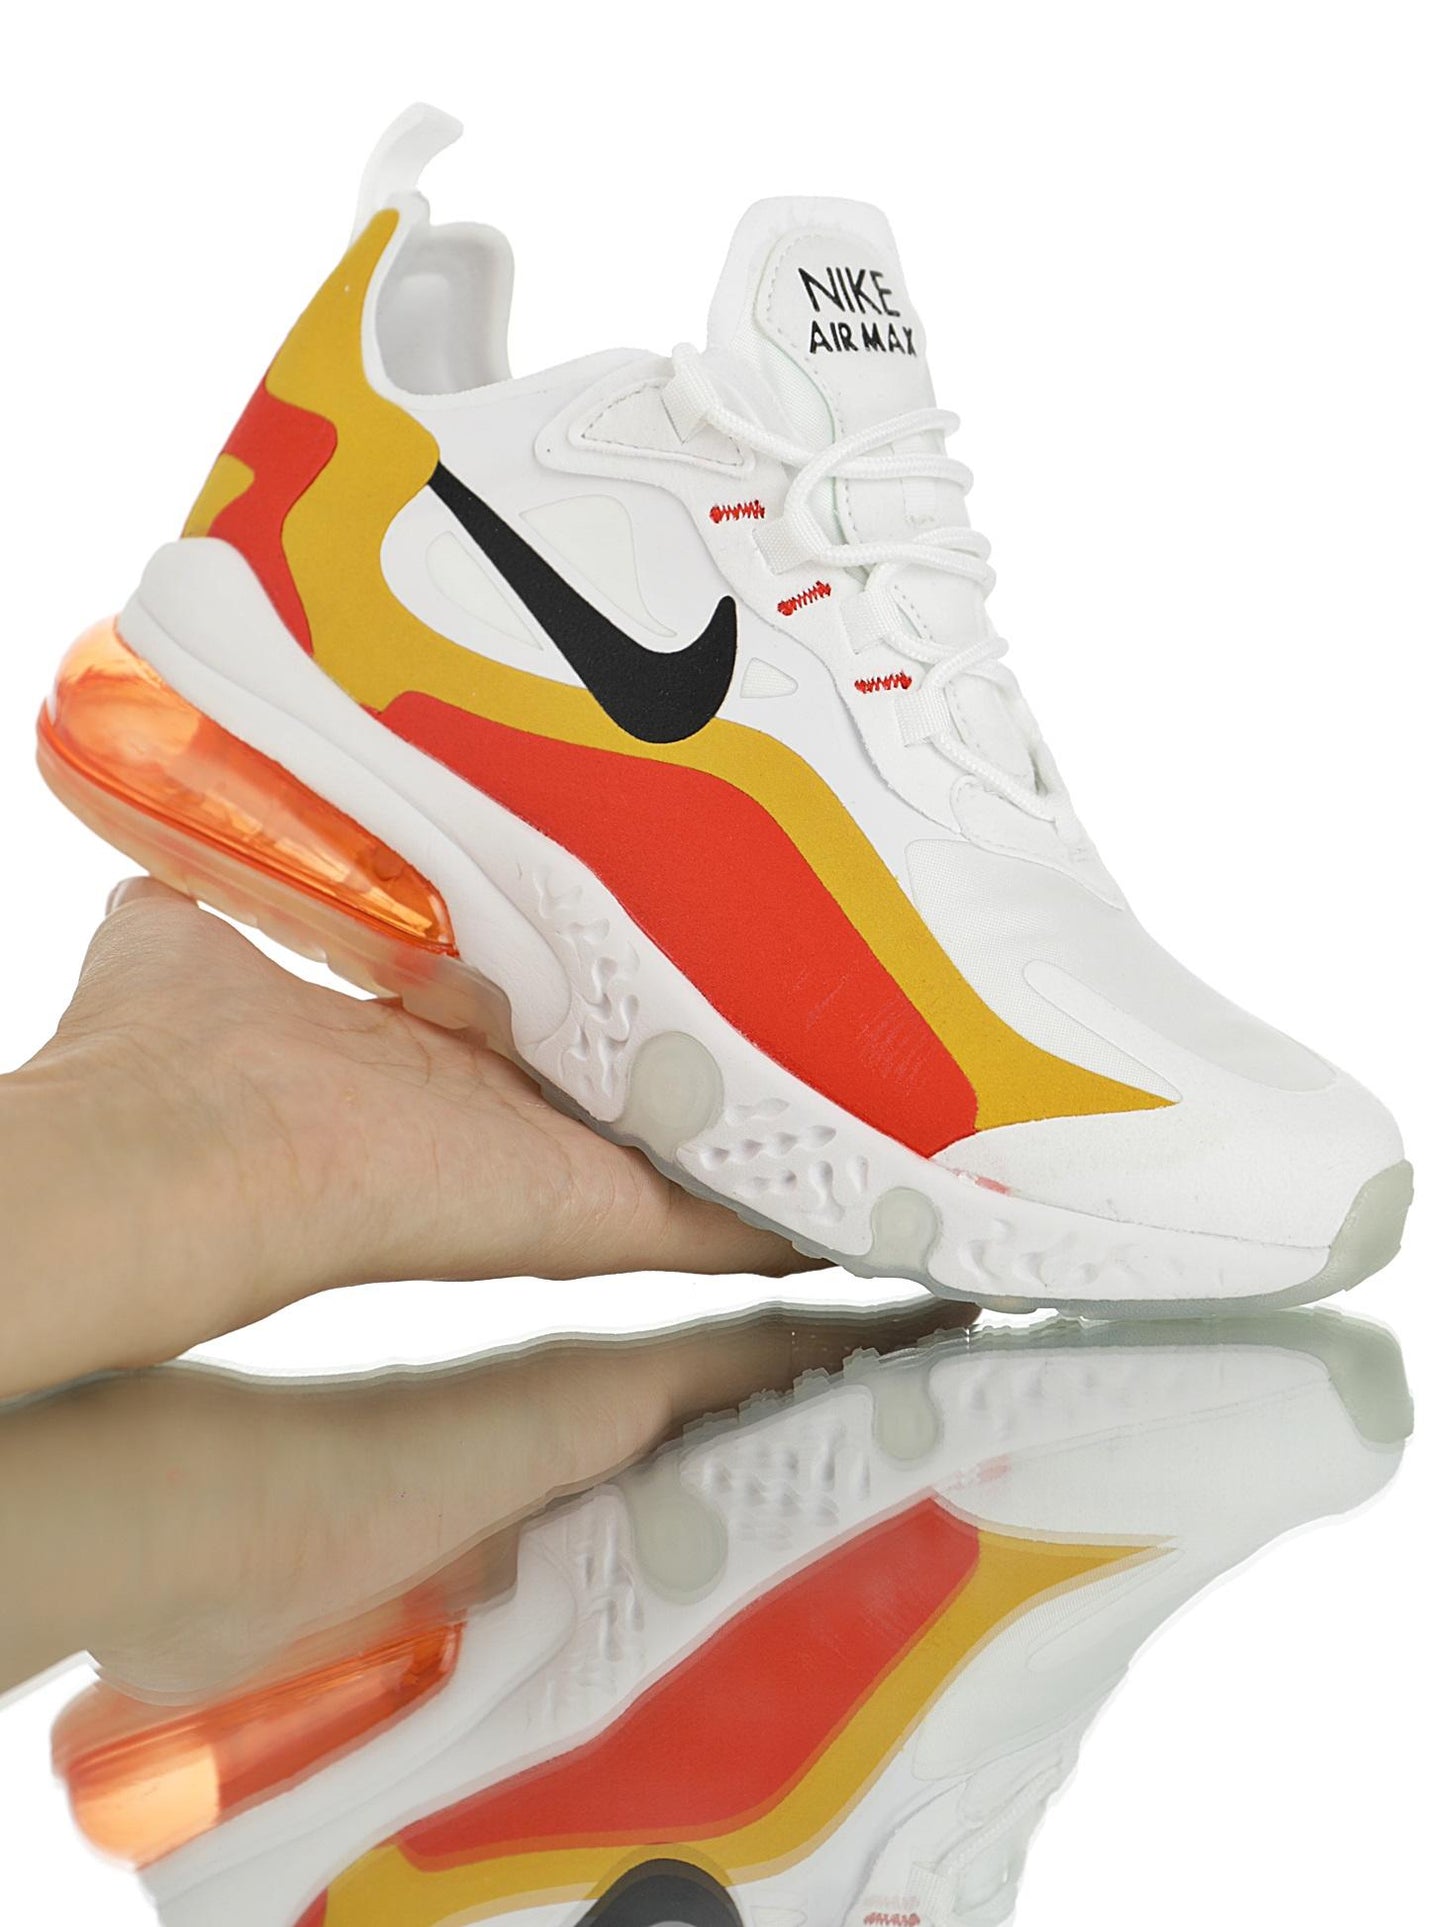 Air Max 270 React - whatever on 